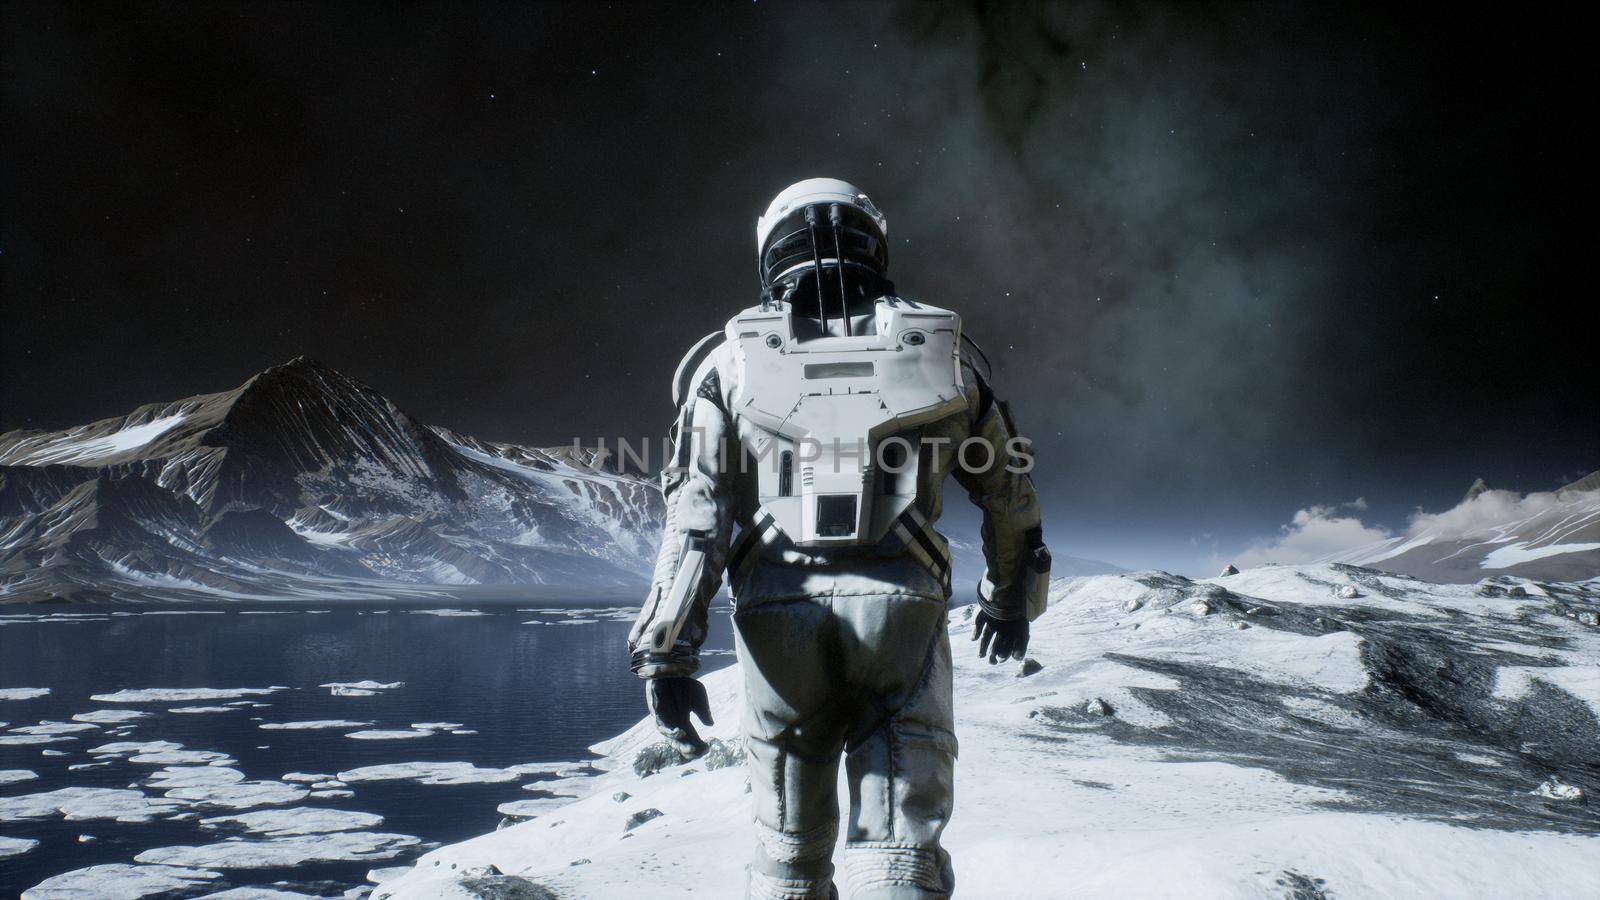 The astronaut is walking on a new unknown snow planet under alien constellations and nebulae.